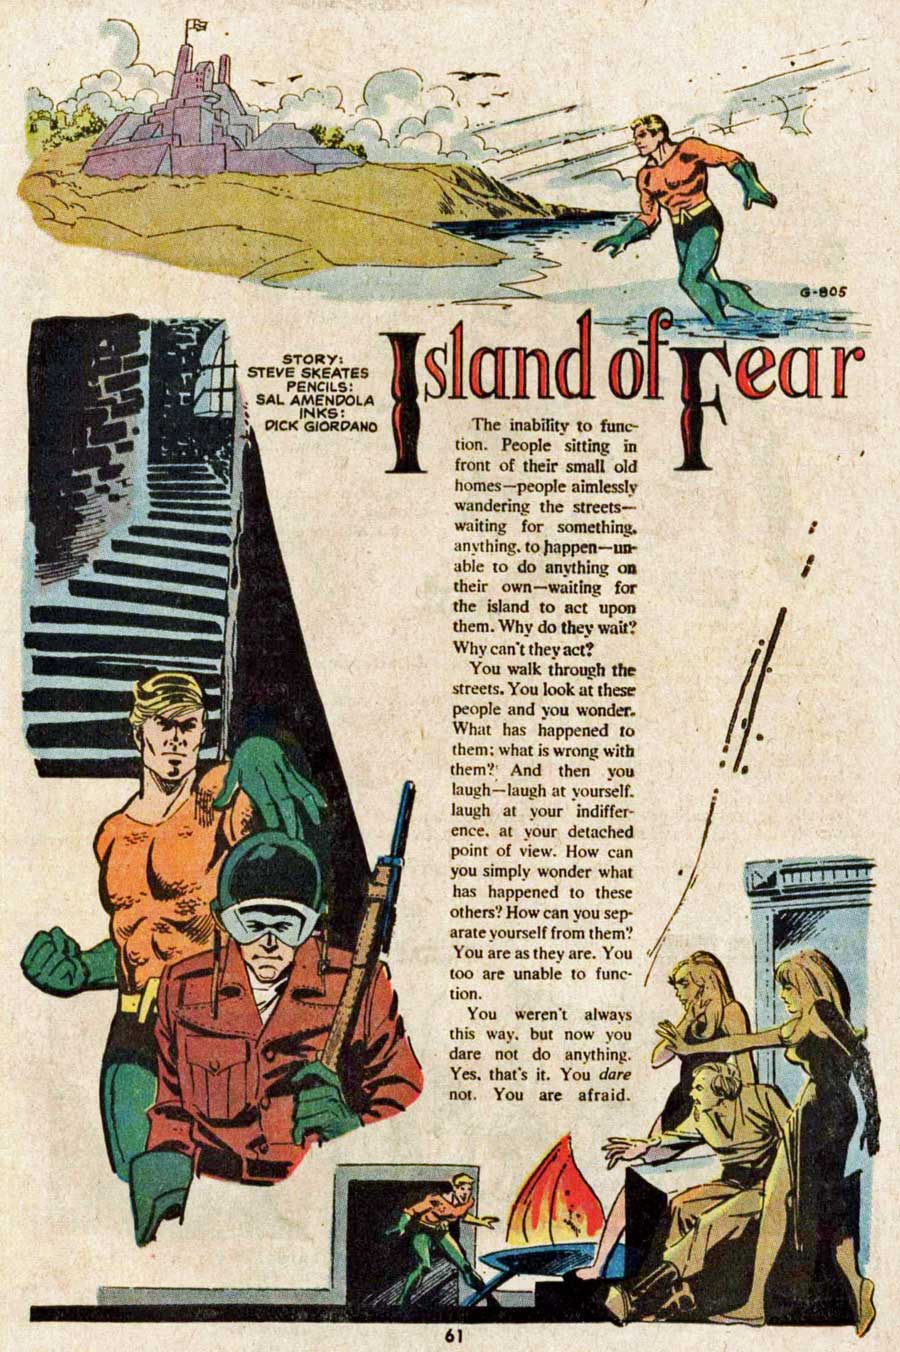 SUPER DC GIANT #26 featuring Aquaman by Ramona Fradon